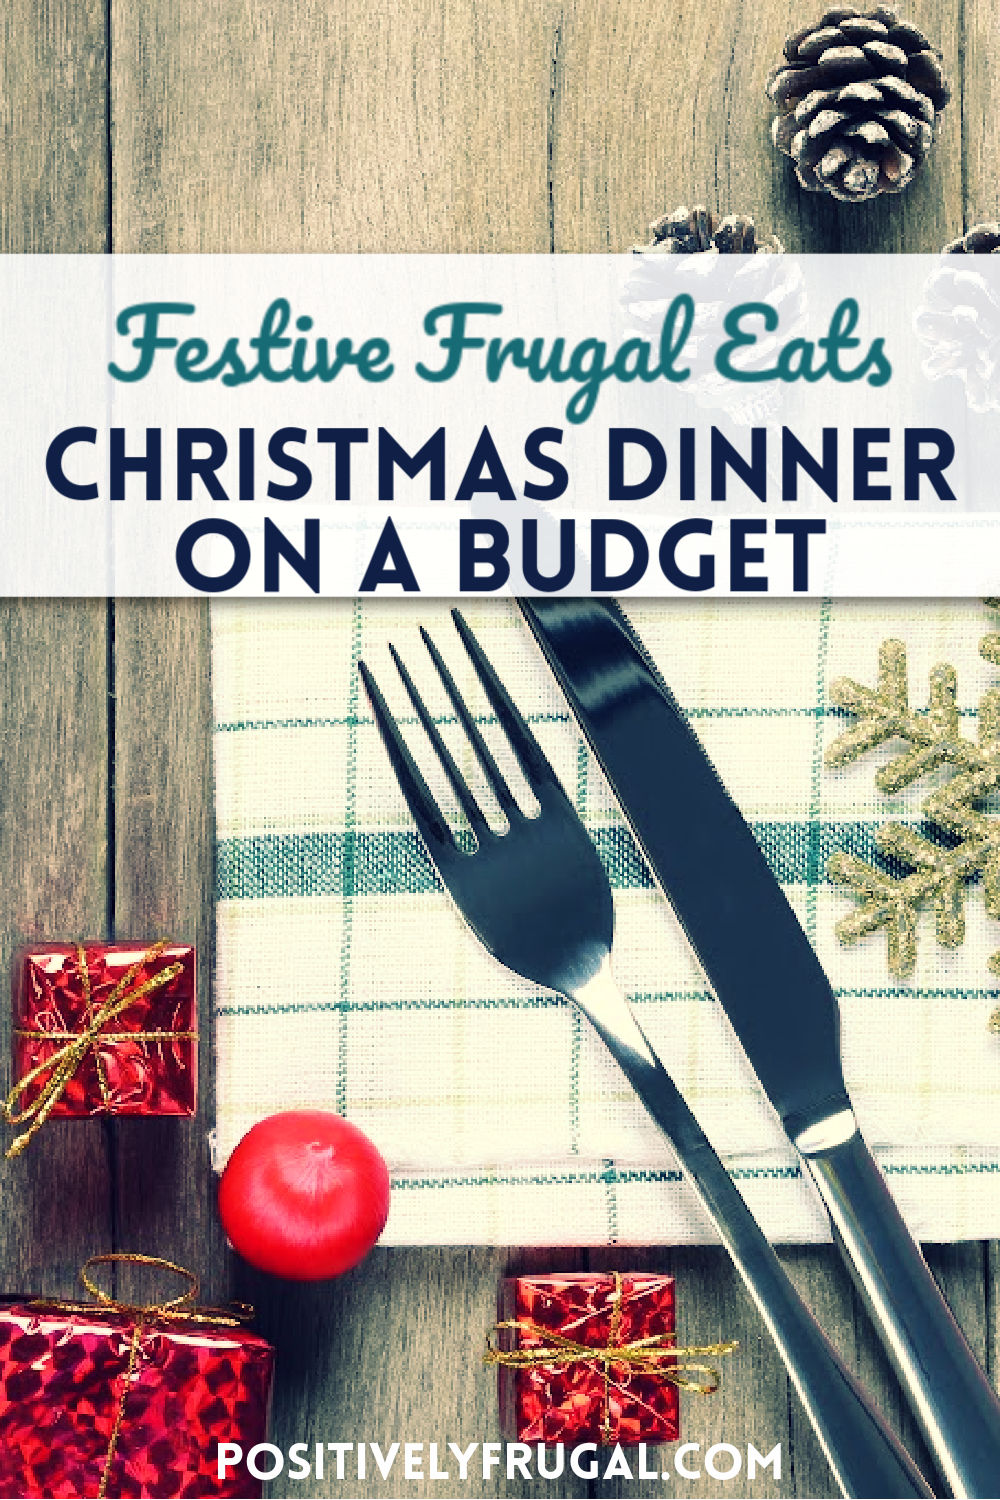 Christmas Dinner on a Budget by PositivelyFrugal.com